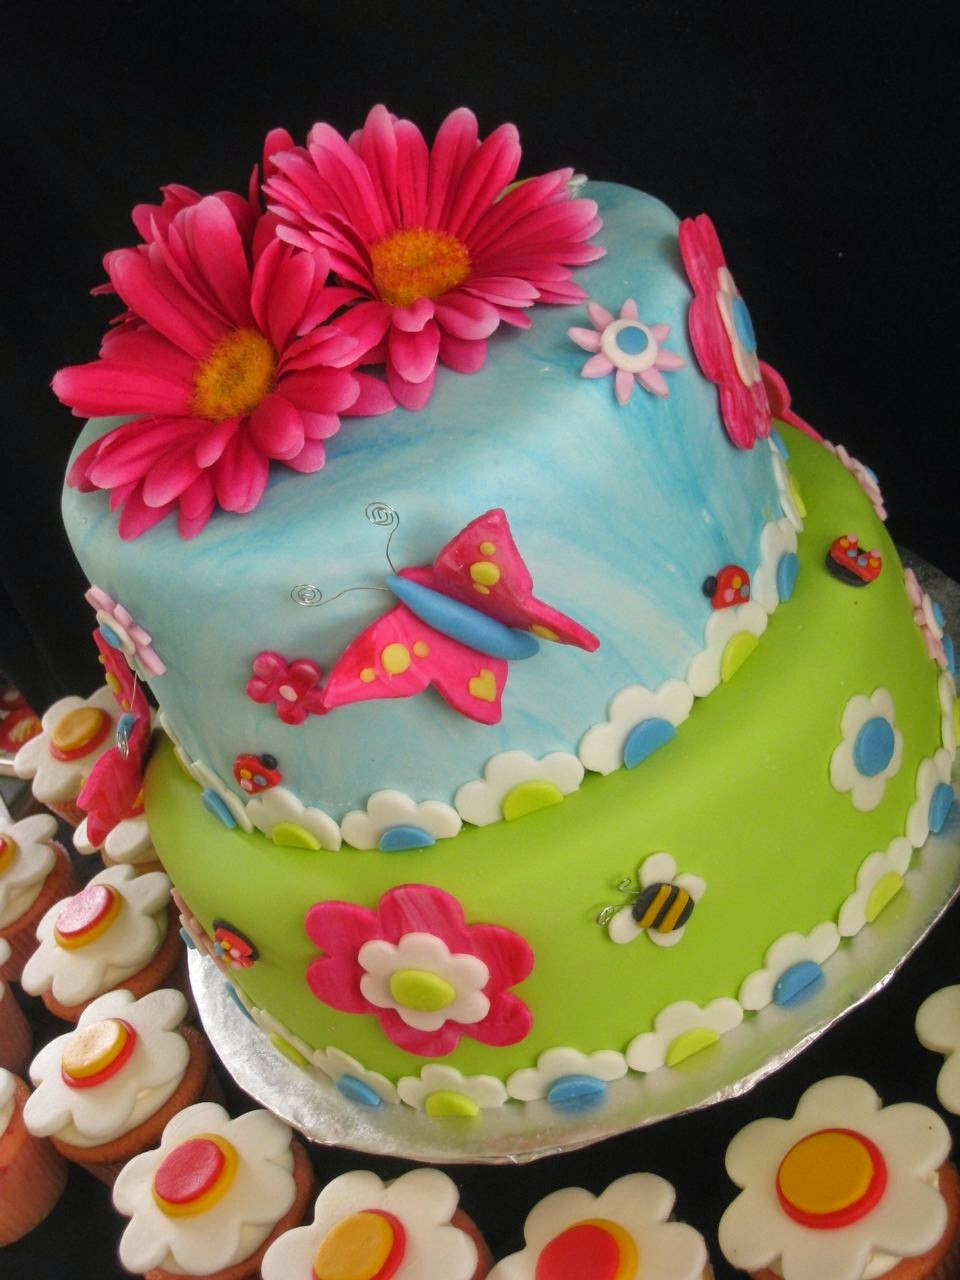 Cake Pictures For Birthday Girl
 Top 77 s Cakes For Birthday Girls